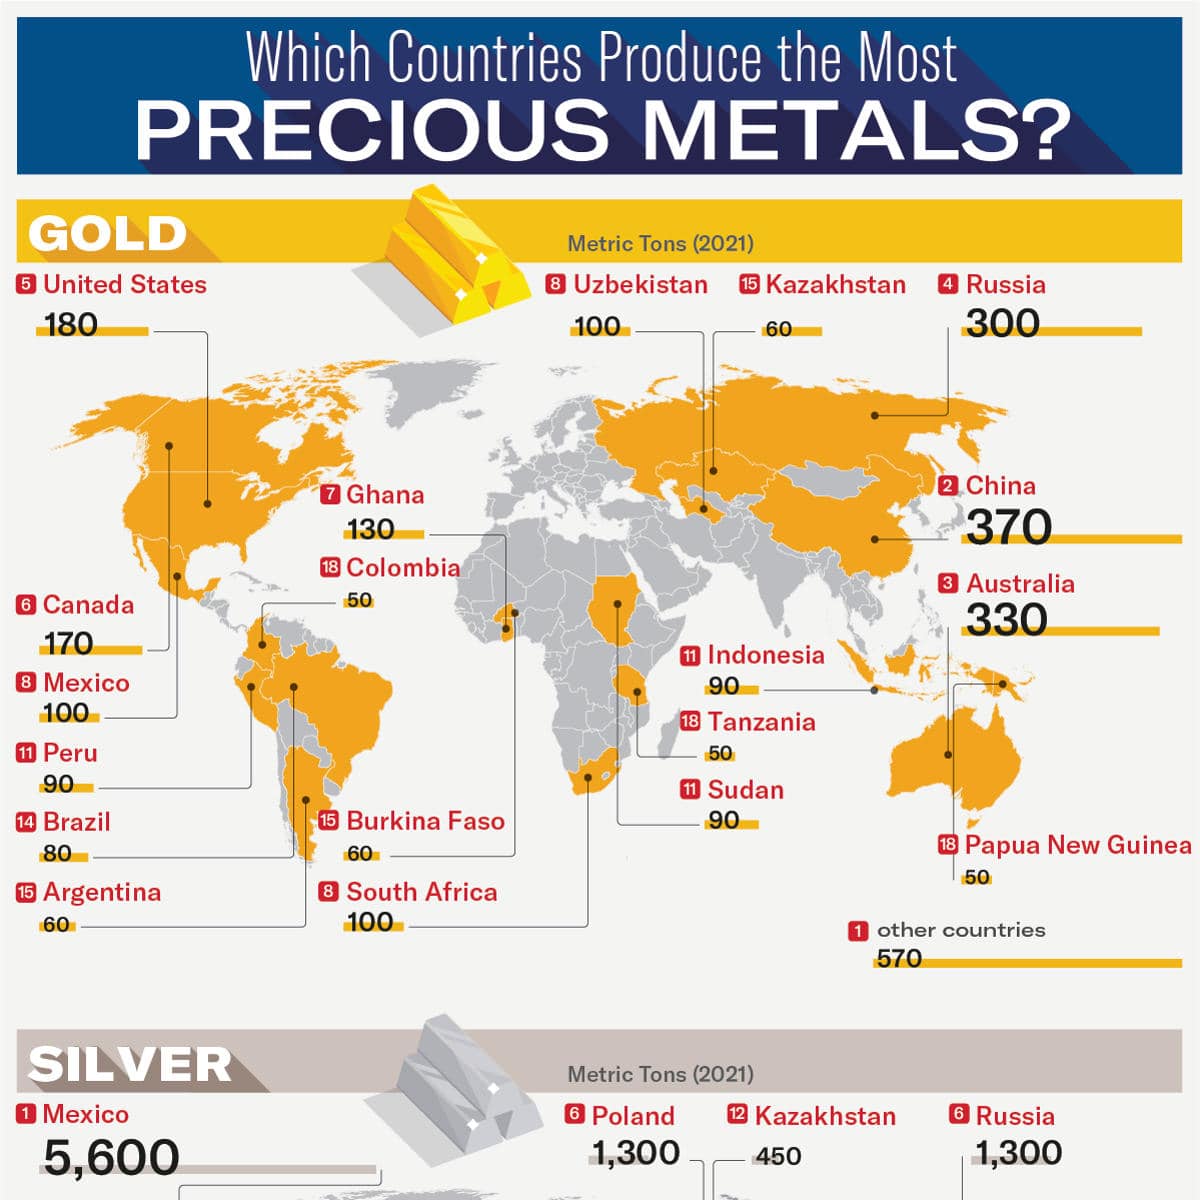 Top 5 Uses Of Gold – One Of The World's Most Coveted Metals